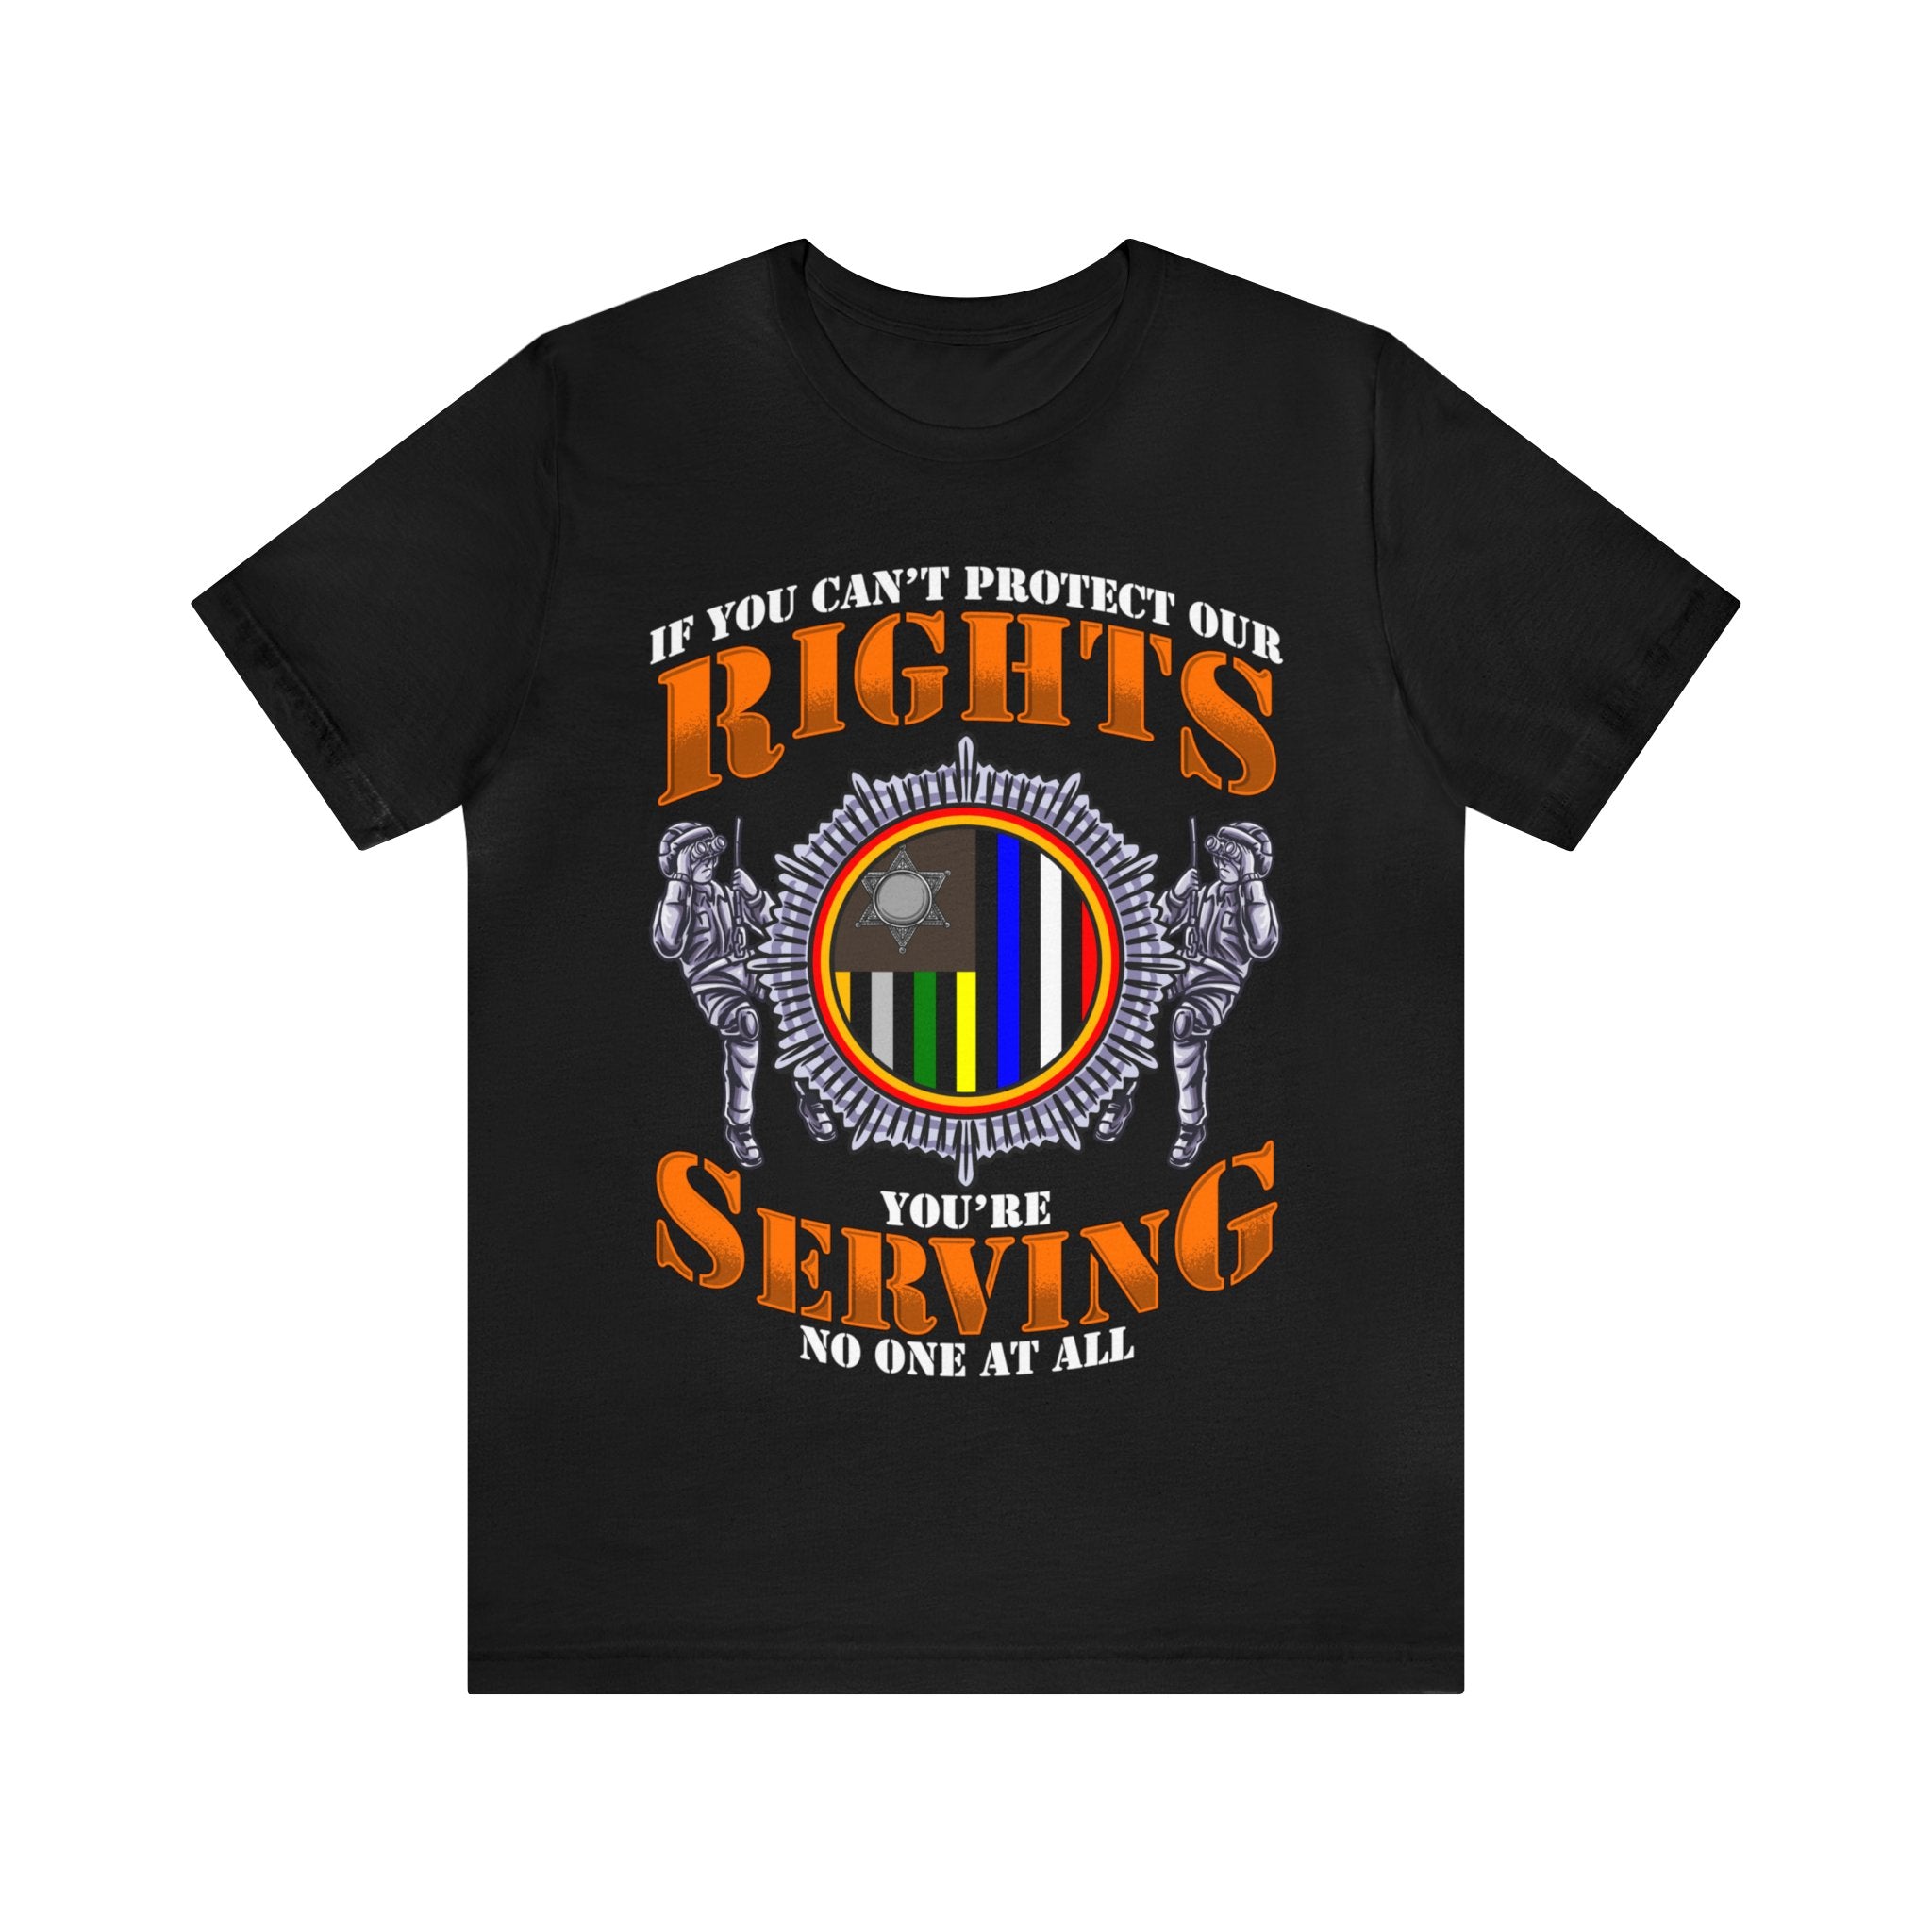 Thin Search & Rescue Line Tee - Rights/Serving